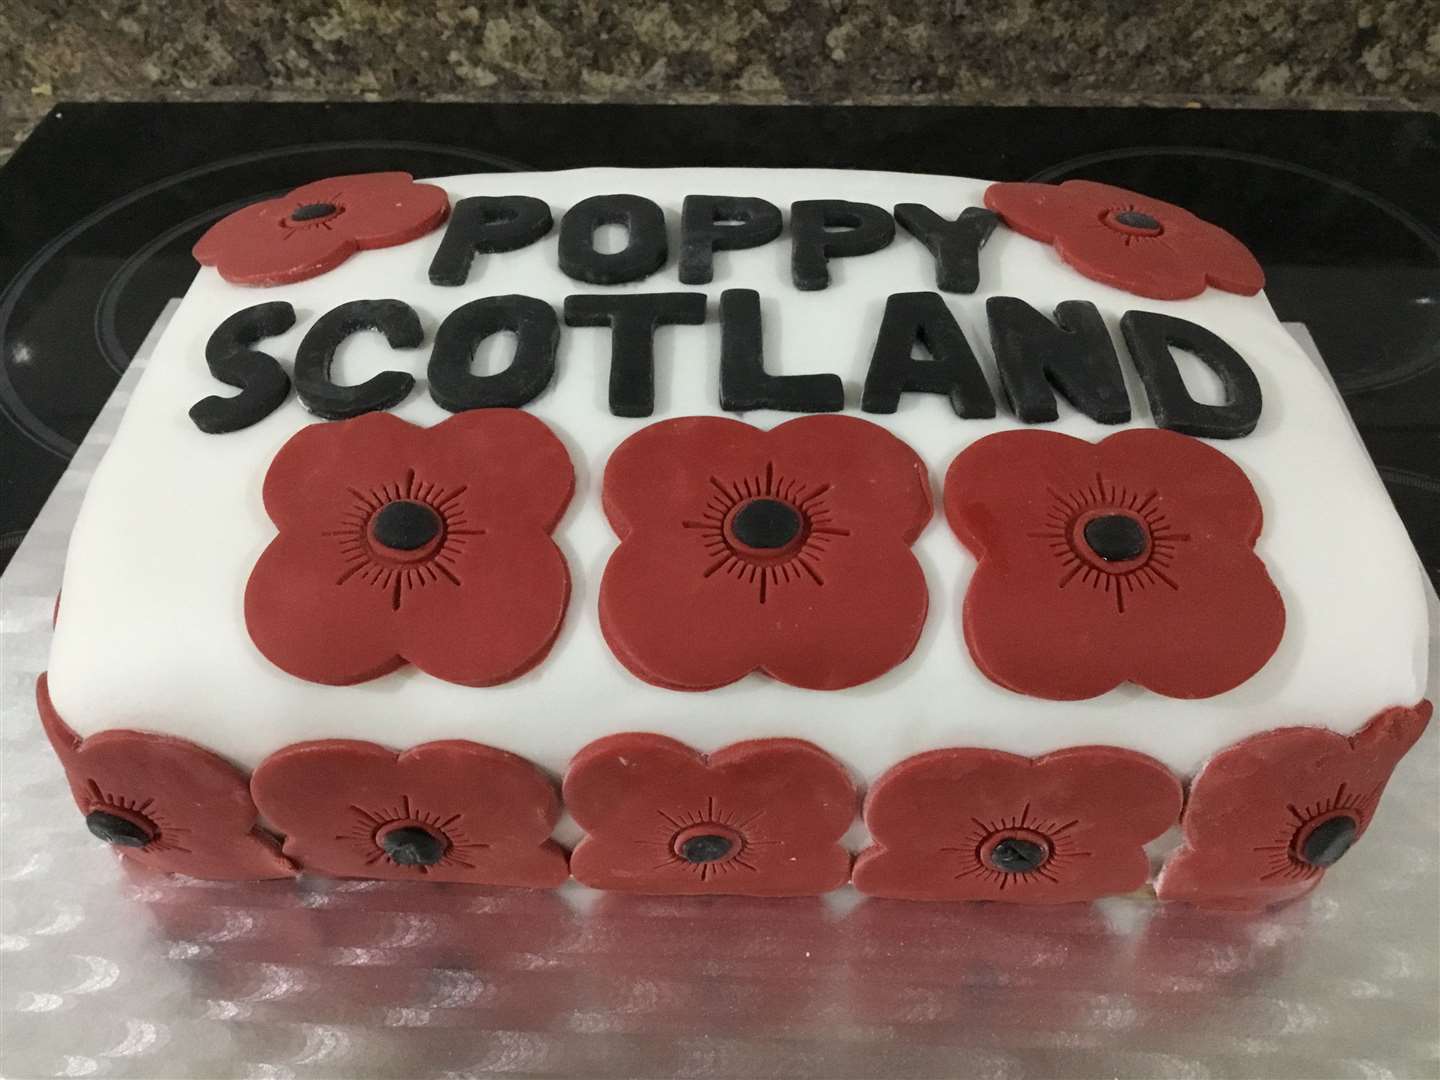 The Poppy Family have raised thousands for Poppyscotland in memory of Rhona MacFarlane, who died in tragic circumstances in 2019.